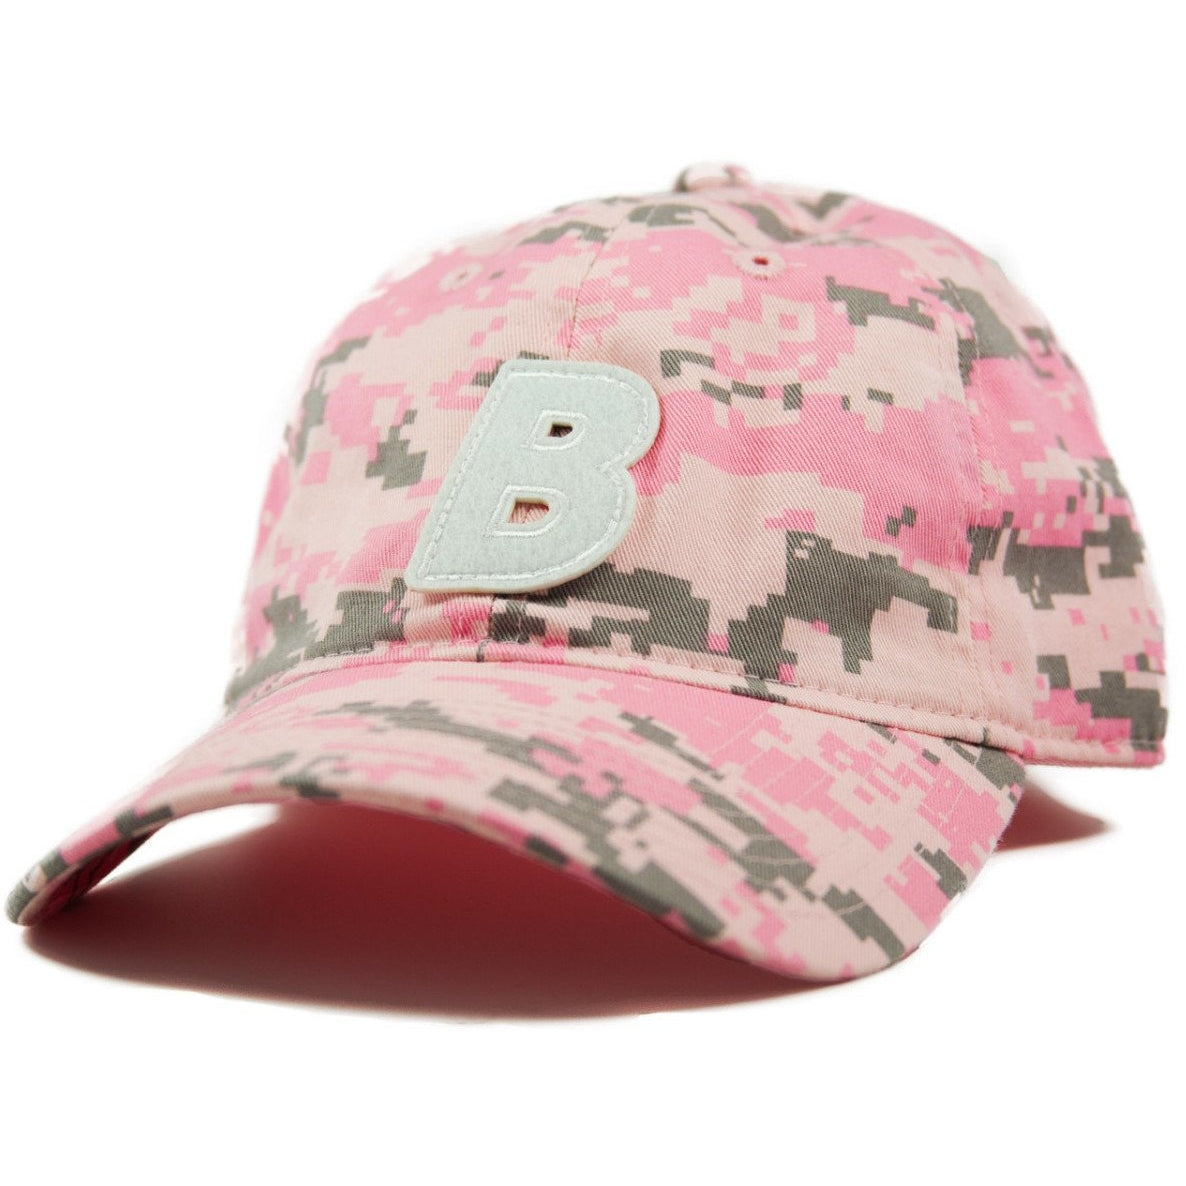 6-panel unconstructed Cotton digital pink dad hat featuring BLED letter logo felt patch on the front and BLED logo embroidered on the back with adjustable strap closure. skate, skateboarding, hype, streetwear